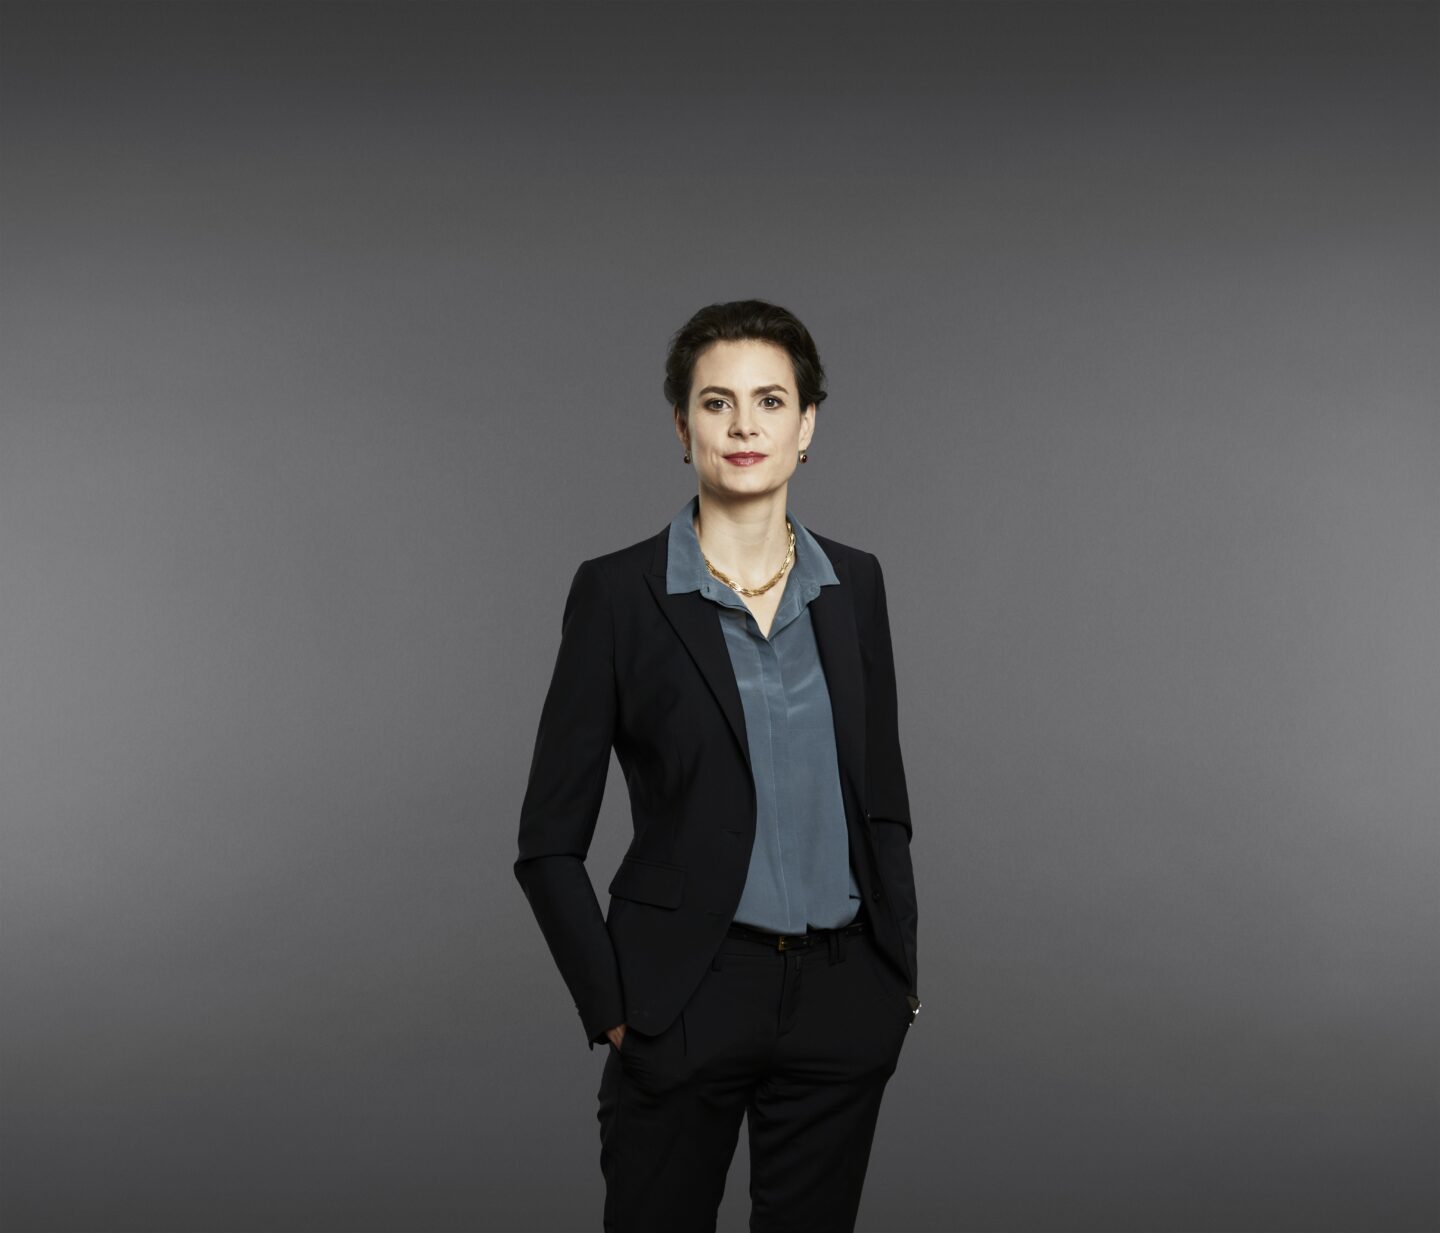 Slim woman in black, smart jacket and pants, with one hand in her pocket.